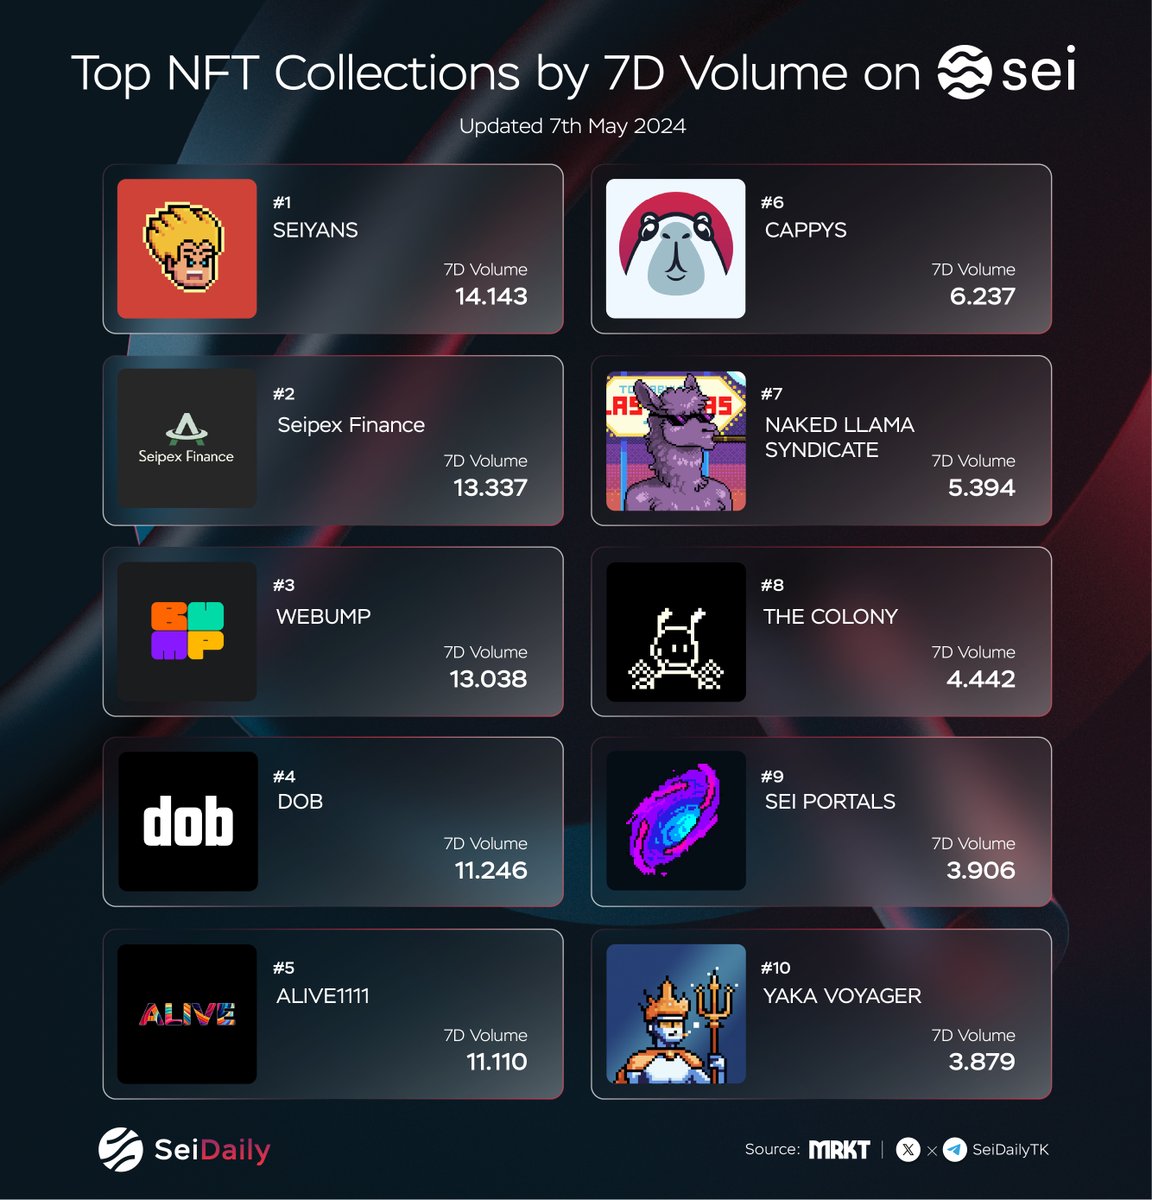 Top NFT Collections by 7D Volume on Sei 🔴💨 @seiyansnft @Seipex_Fi @webump_ @dobnfts @ALIVE1111nfts @CappysNFT @llamasyndicate @TheColonyNFT__ @seiportals @YakaFinance